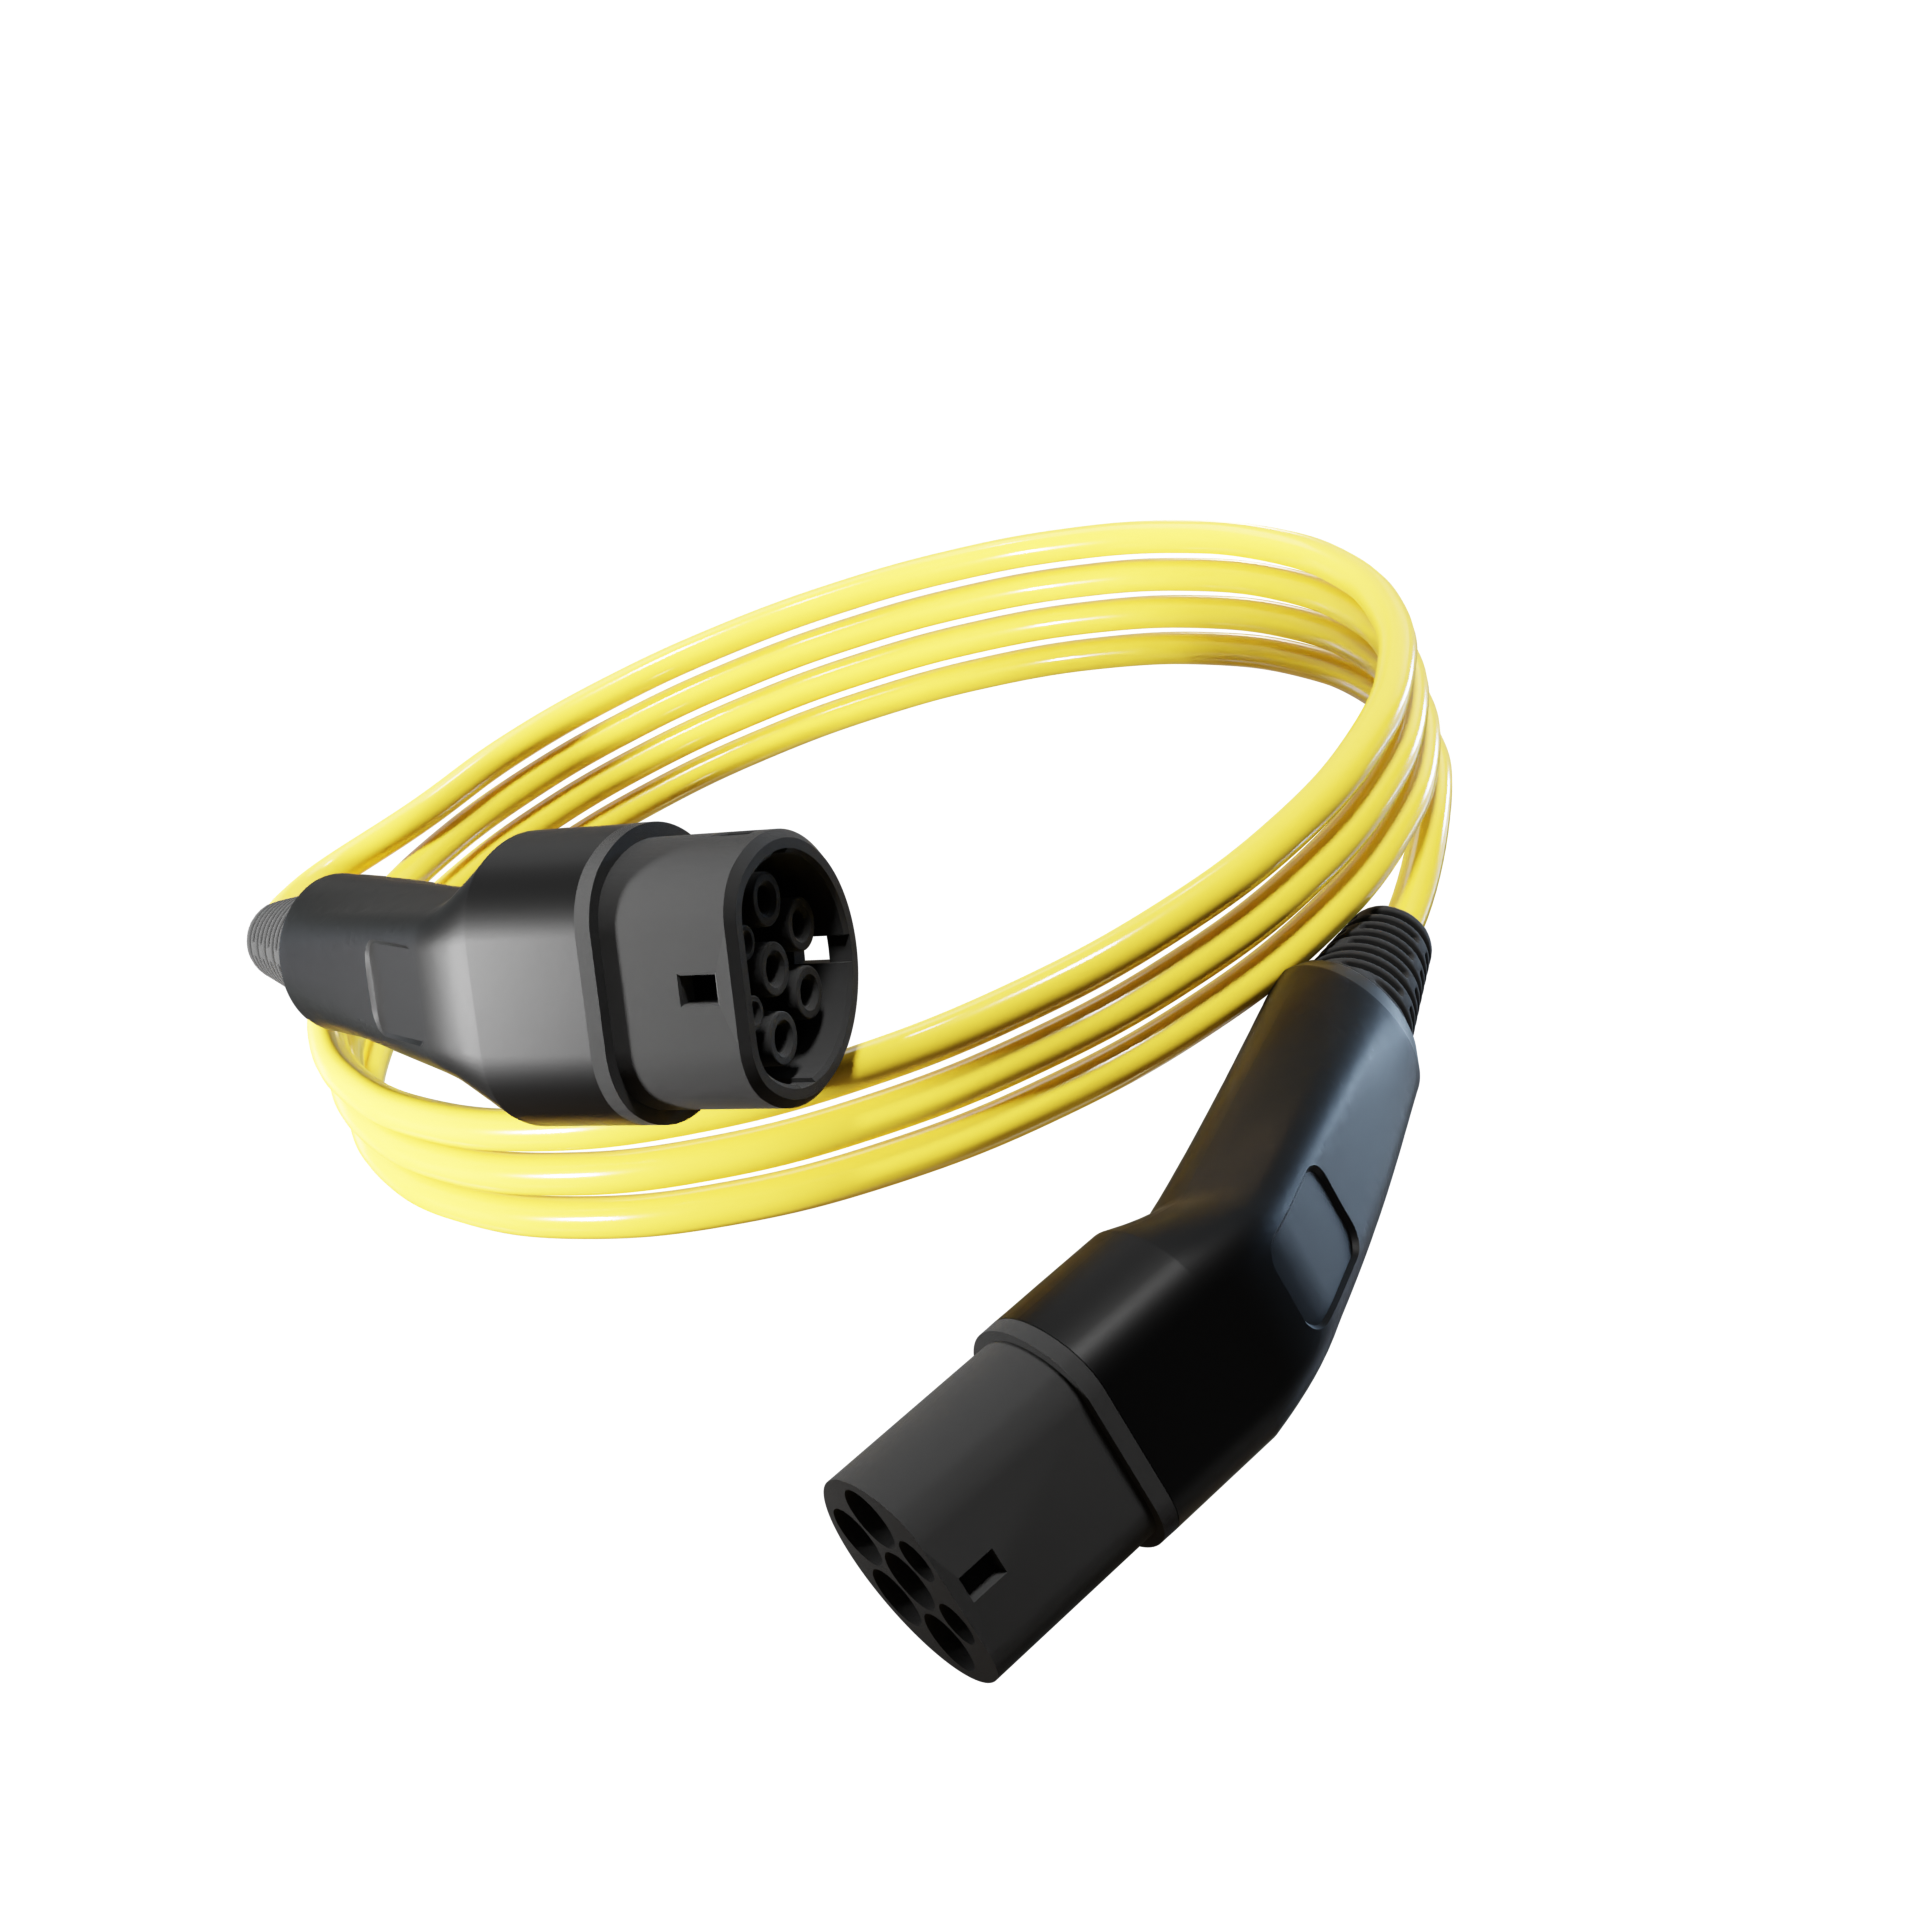 Type 2 to Type 2 EV Charging Cable - Yellow